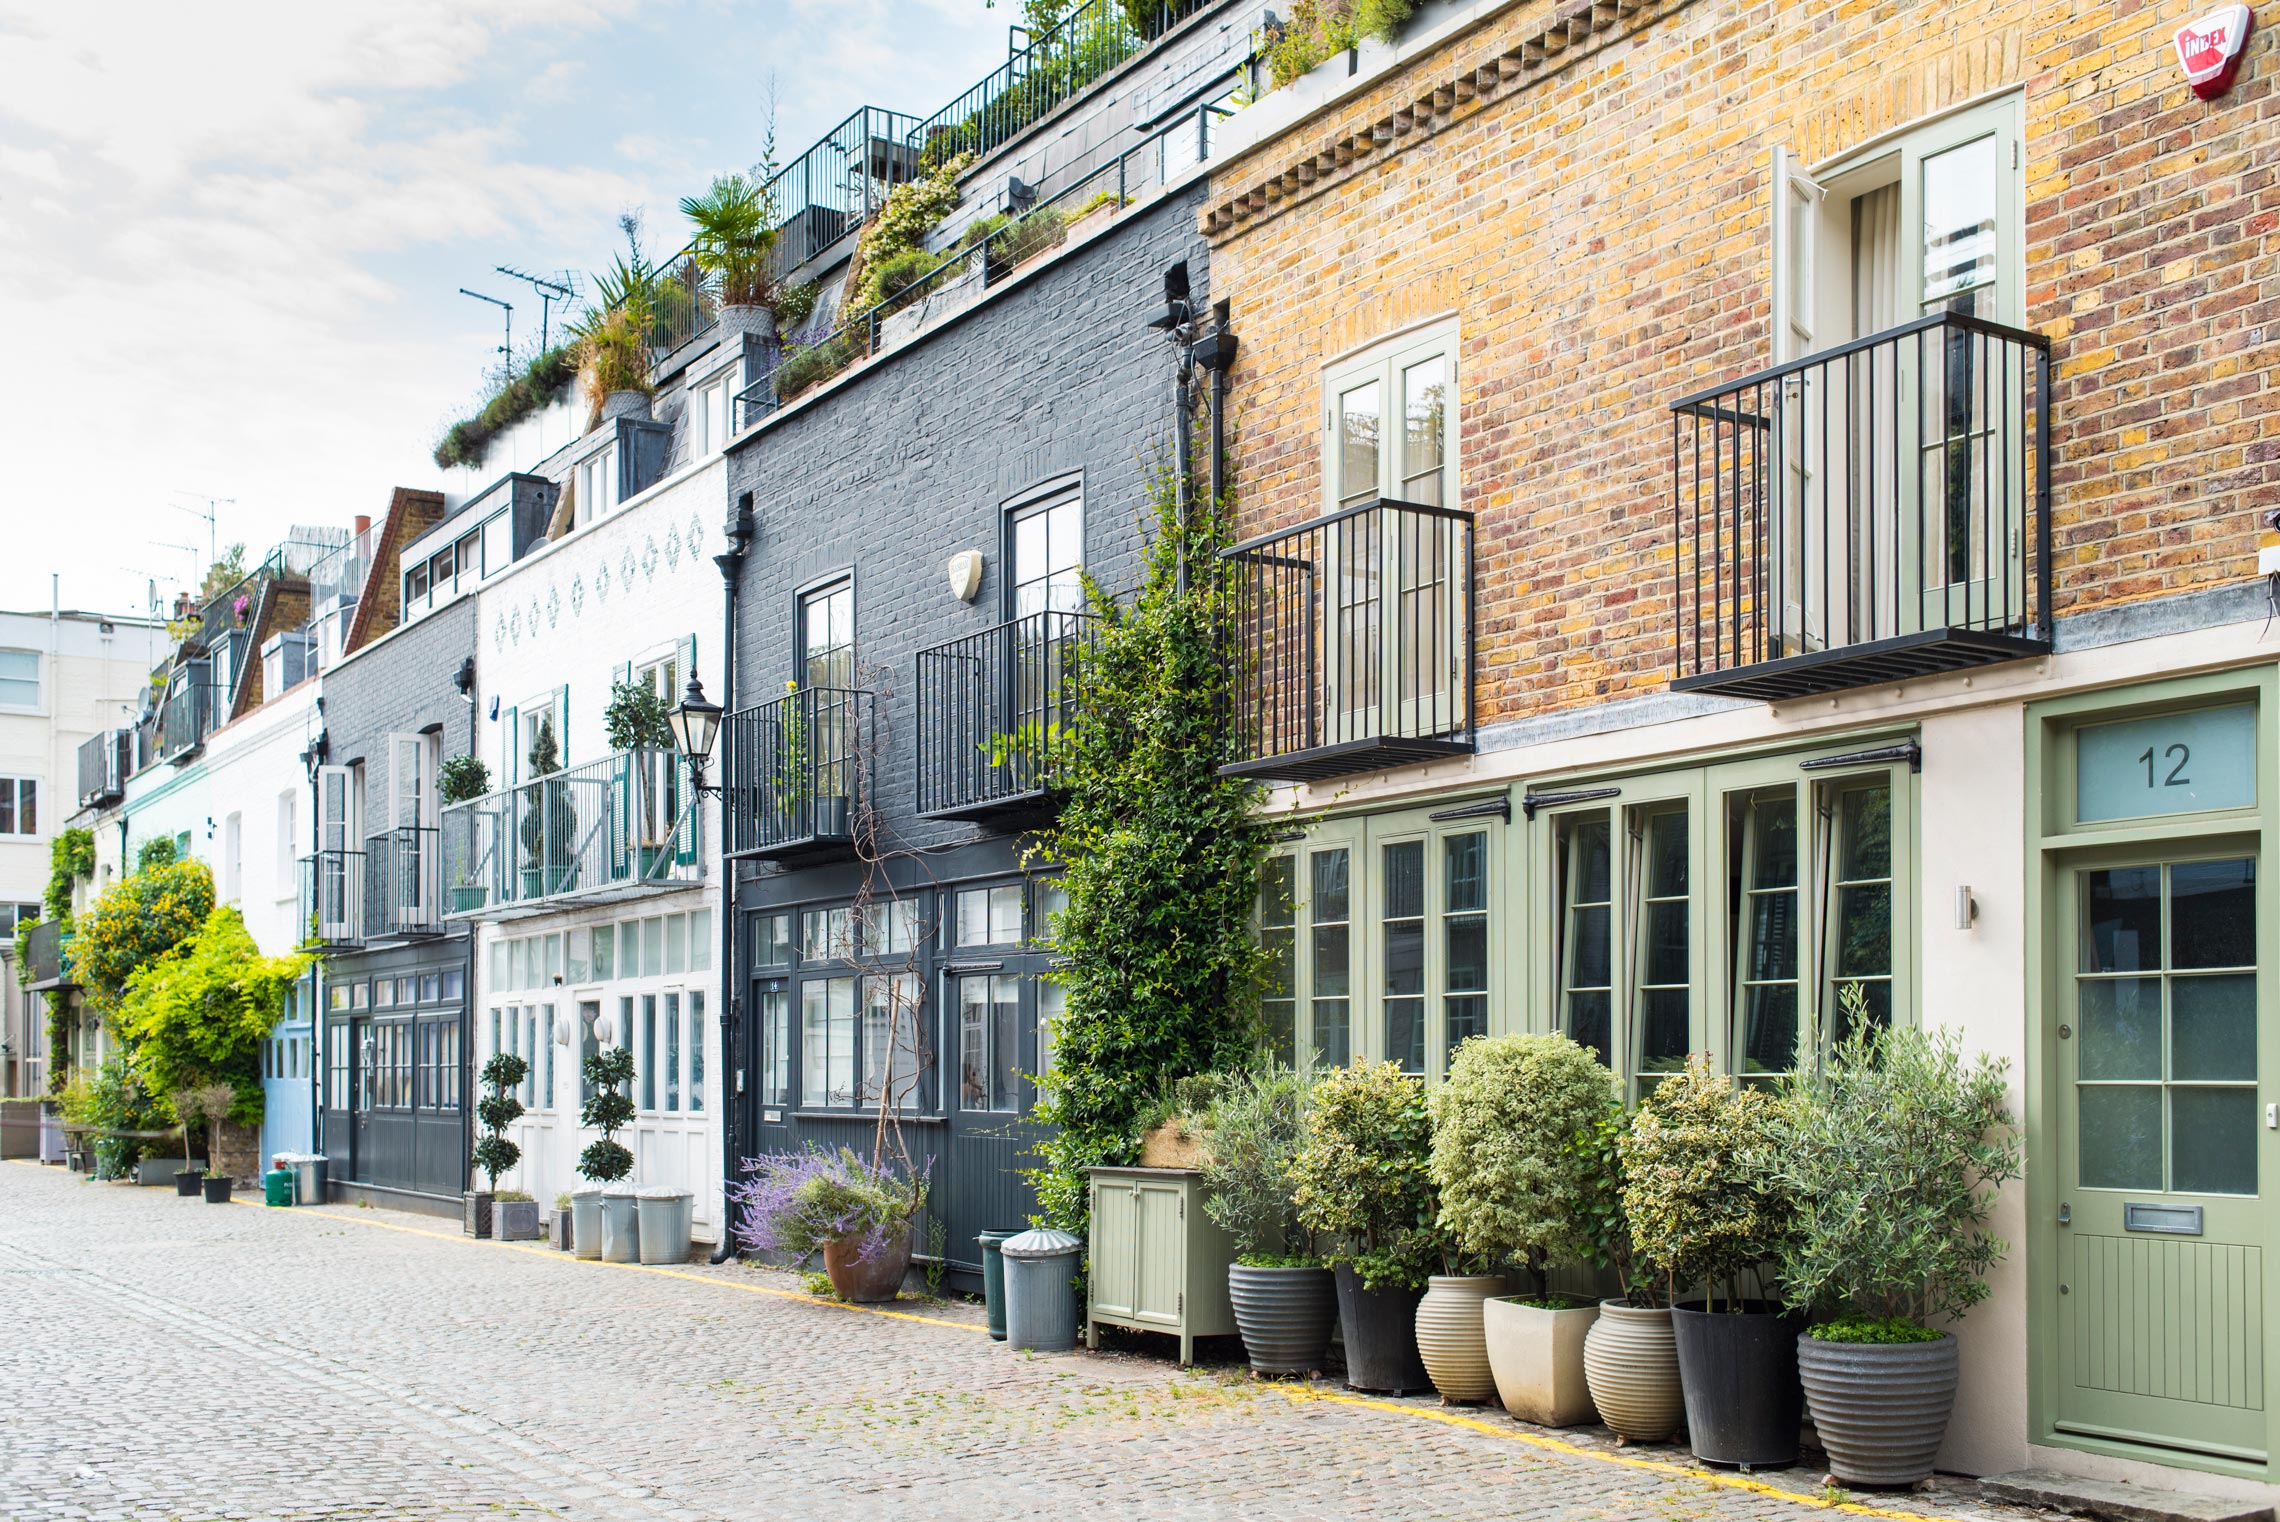 3 Days in London, Notting Hill Mews